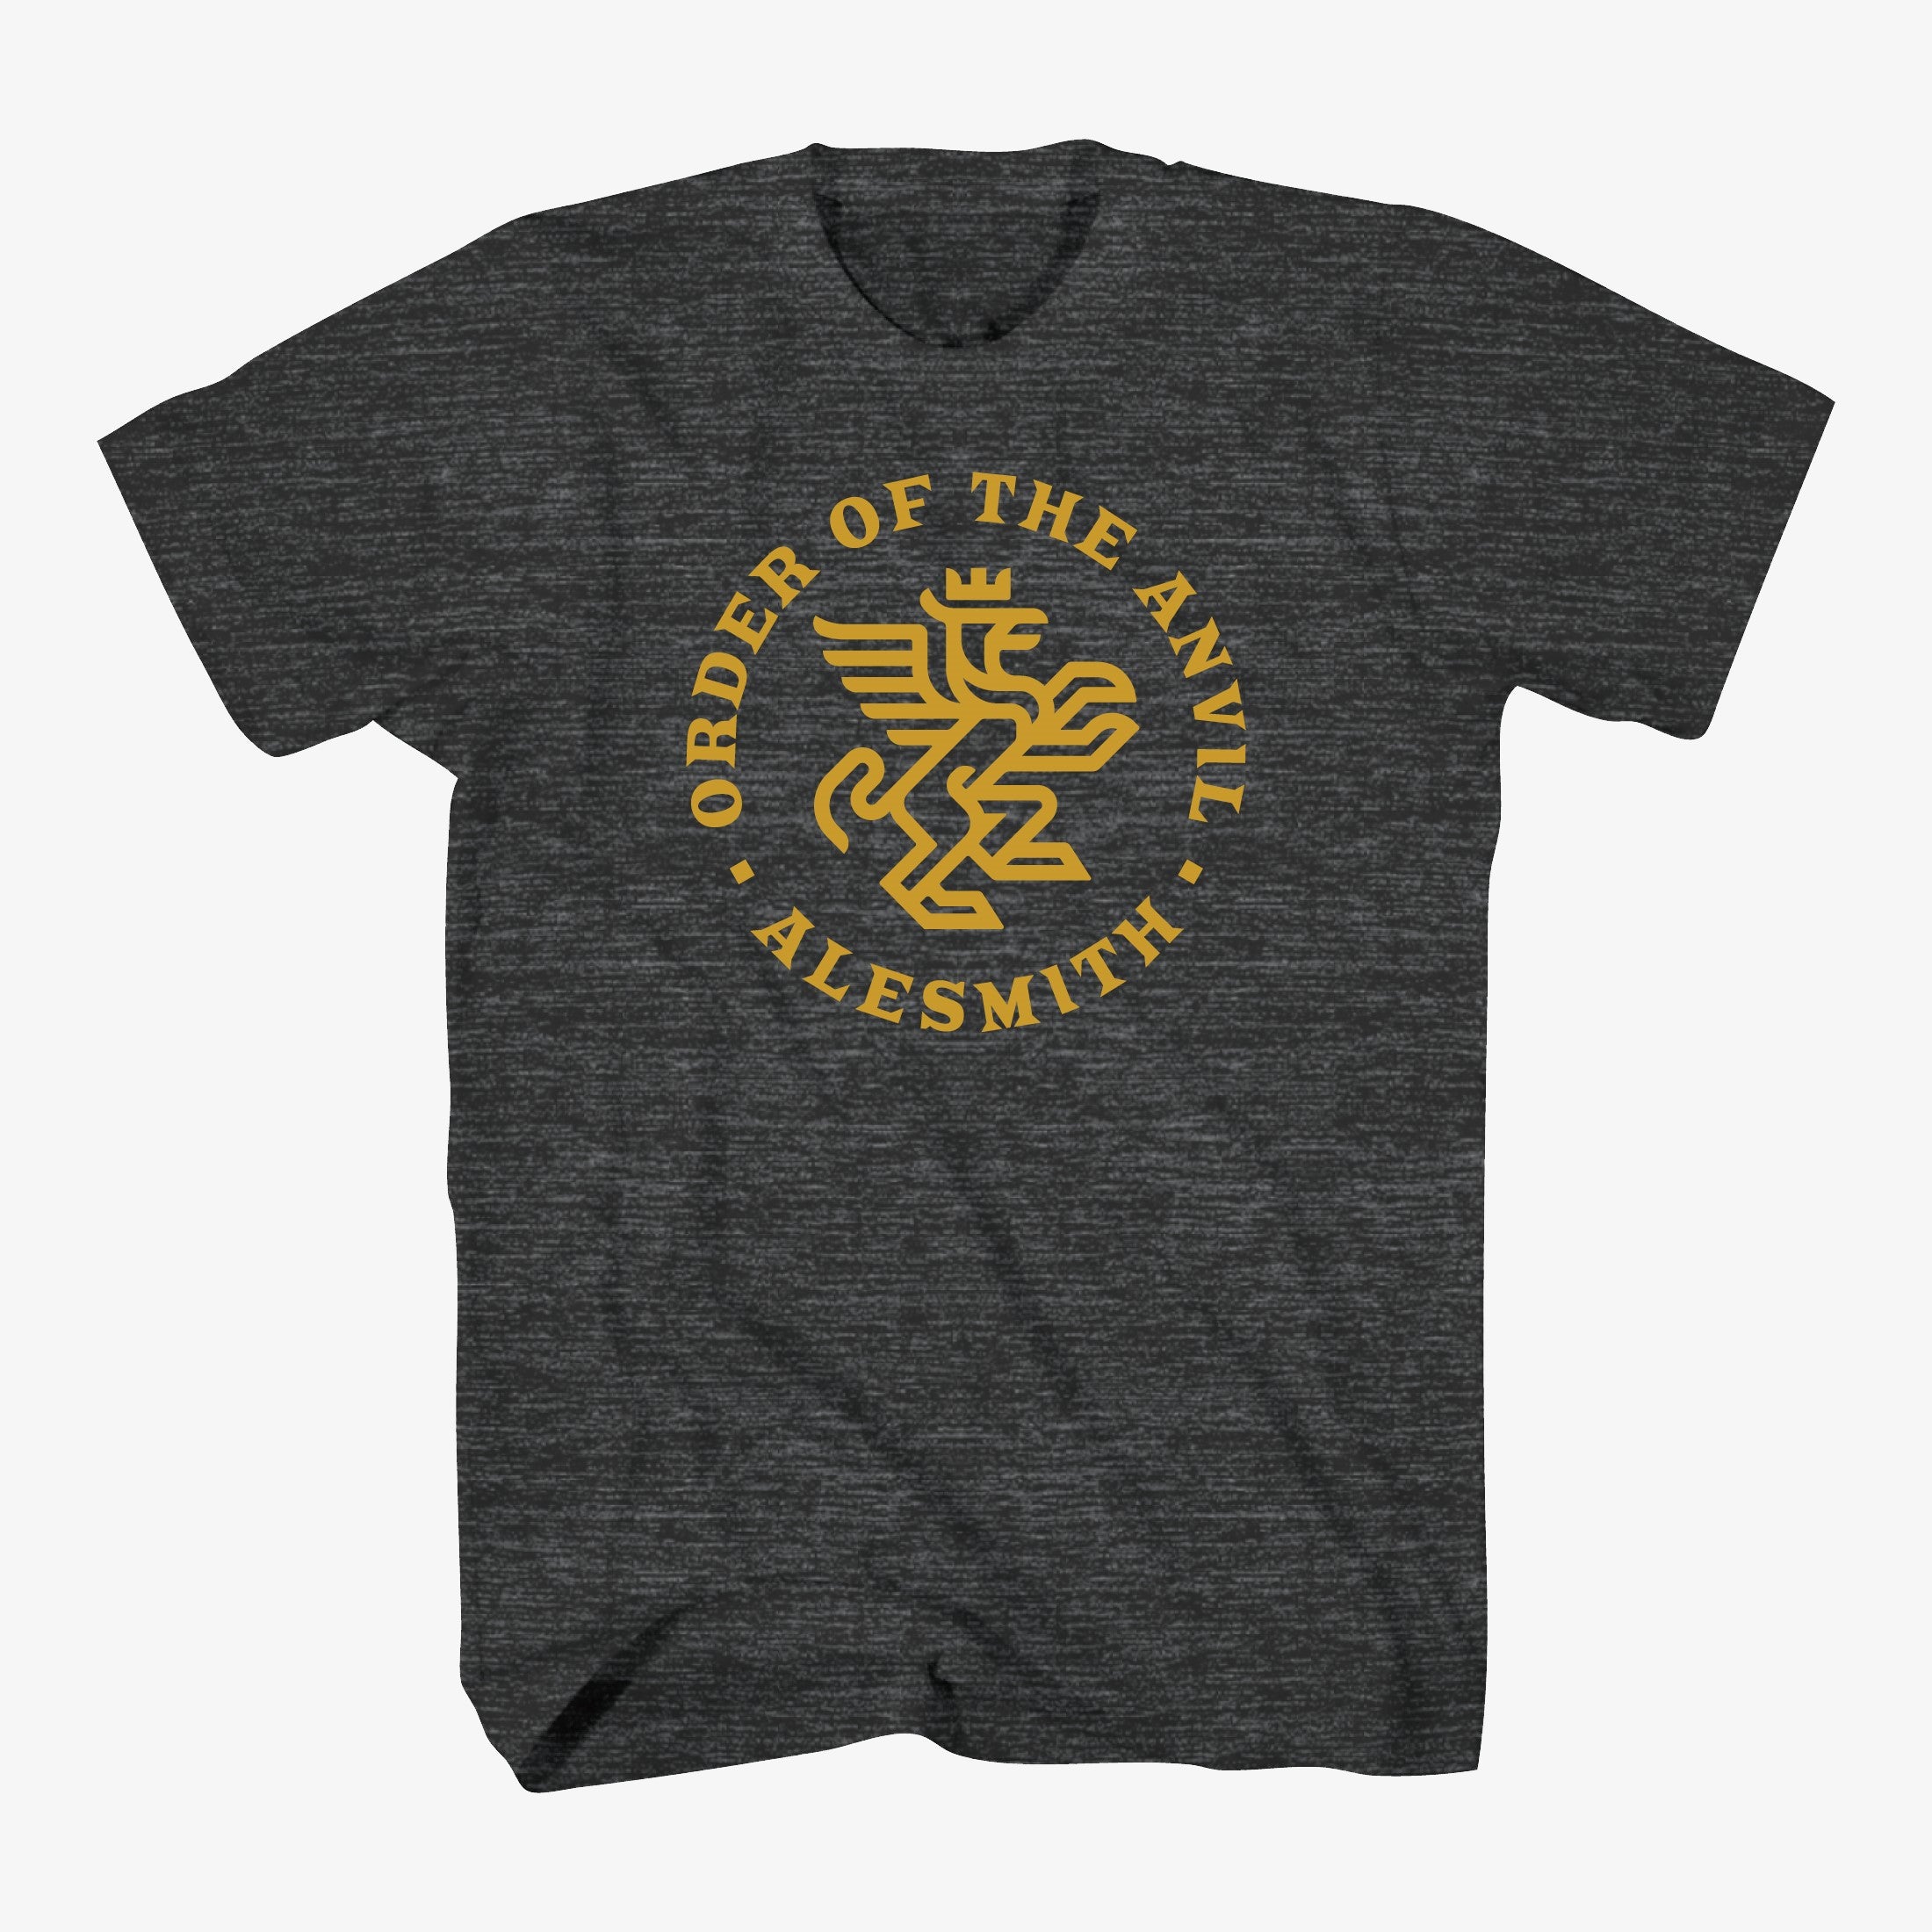 Order of the Anvil Tee - Griffon - AleSmith Brewing Co.